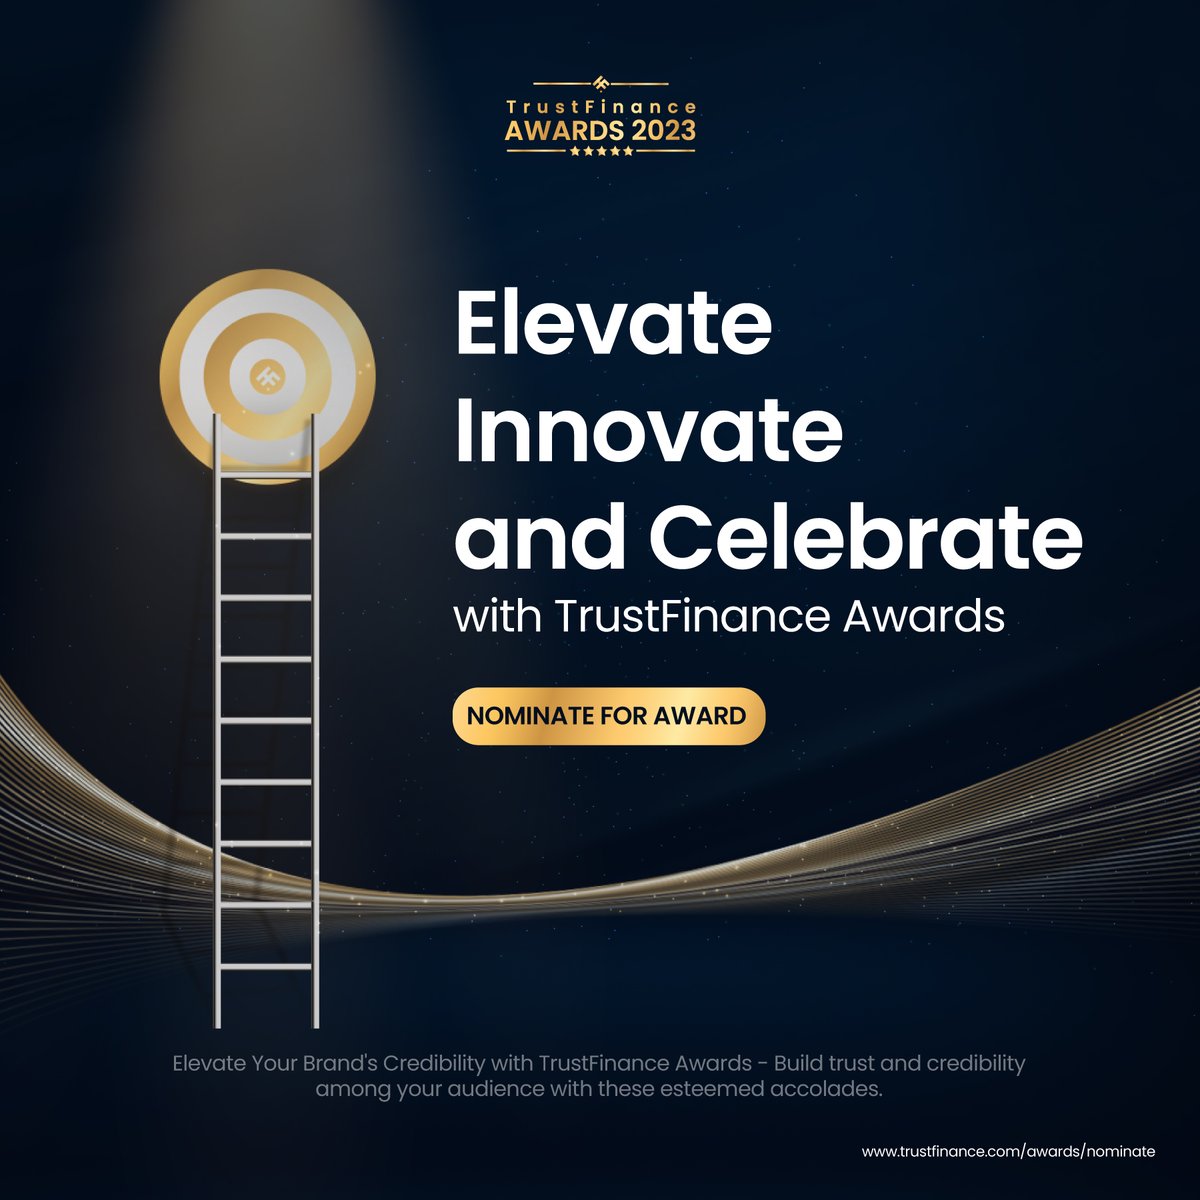 Join us in elevating financial standards, innovating solutions, and celebrating achievers with TrustFinance Awards! 

Nominate now: trustfinance.com/awards/nominate

#TrustFinanceAwards #TrustFinanceAwards2023 #TrustFinance